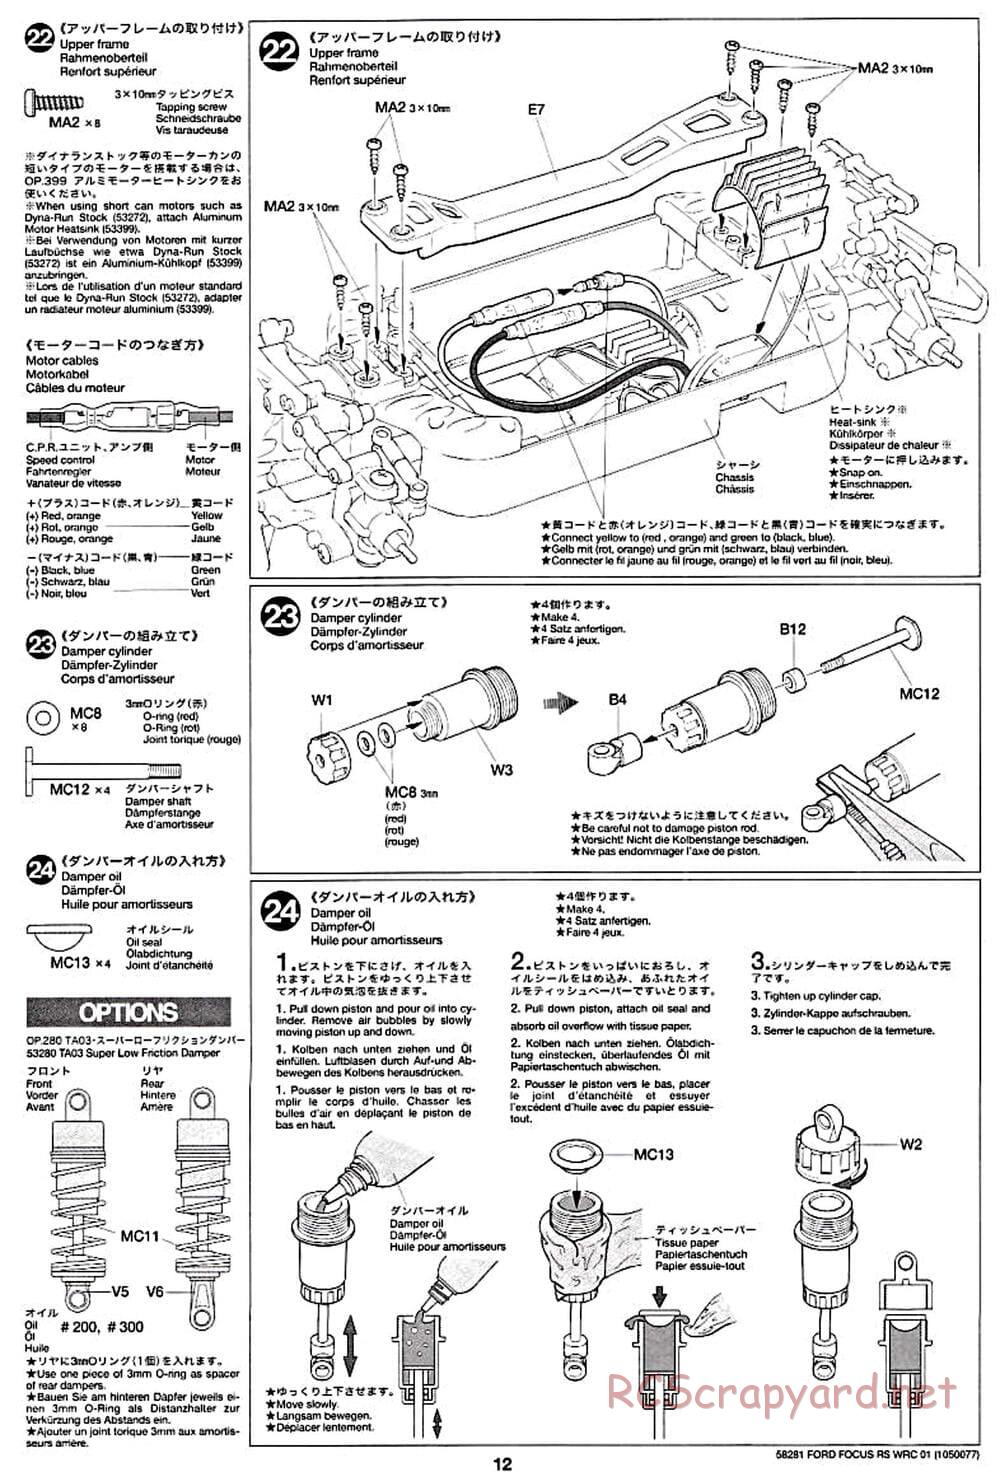 Tamiya - Ford Focus RS WRC 01 - TB-01 Chassis - Manual - Page 12